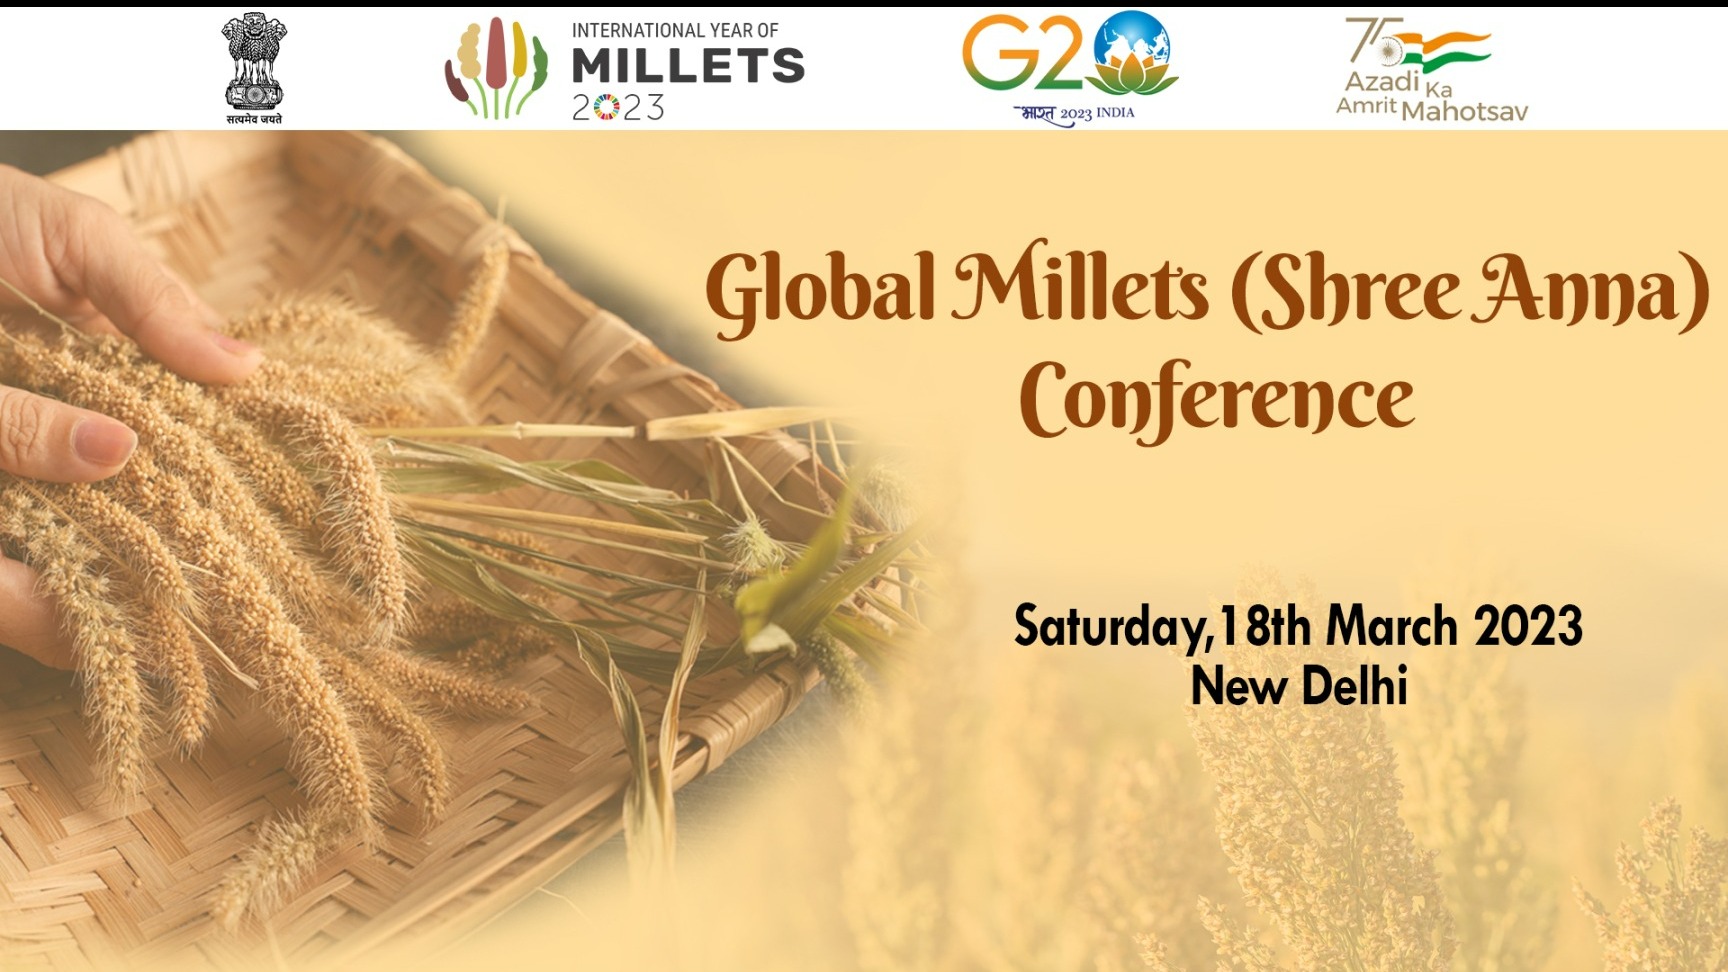 Global Millets (Shree Anna) Conference